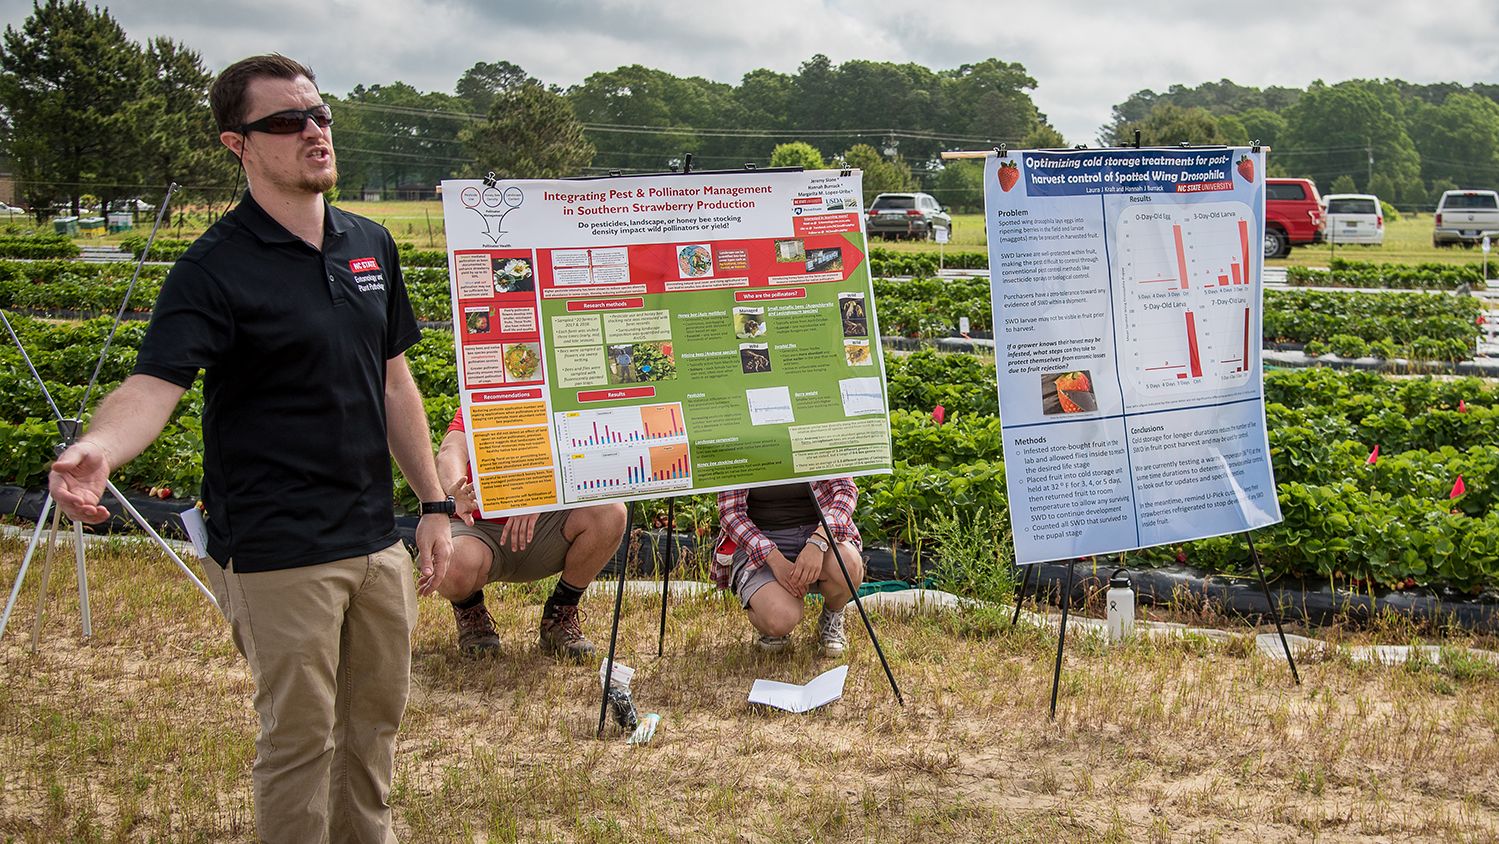 Young male speaking in a field of strawberries with two posters in background